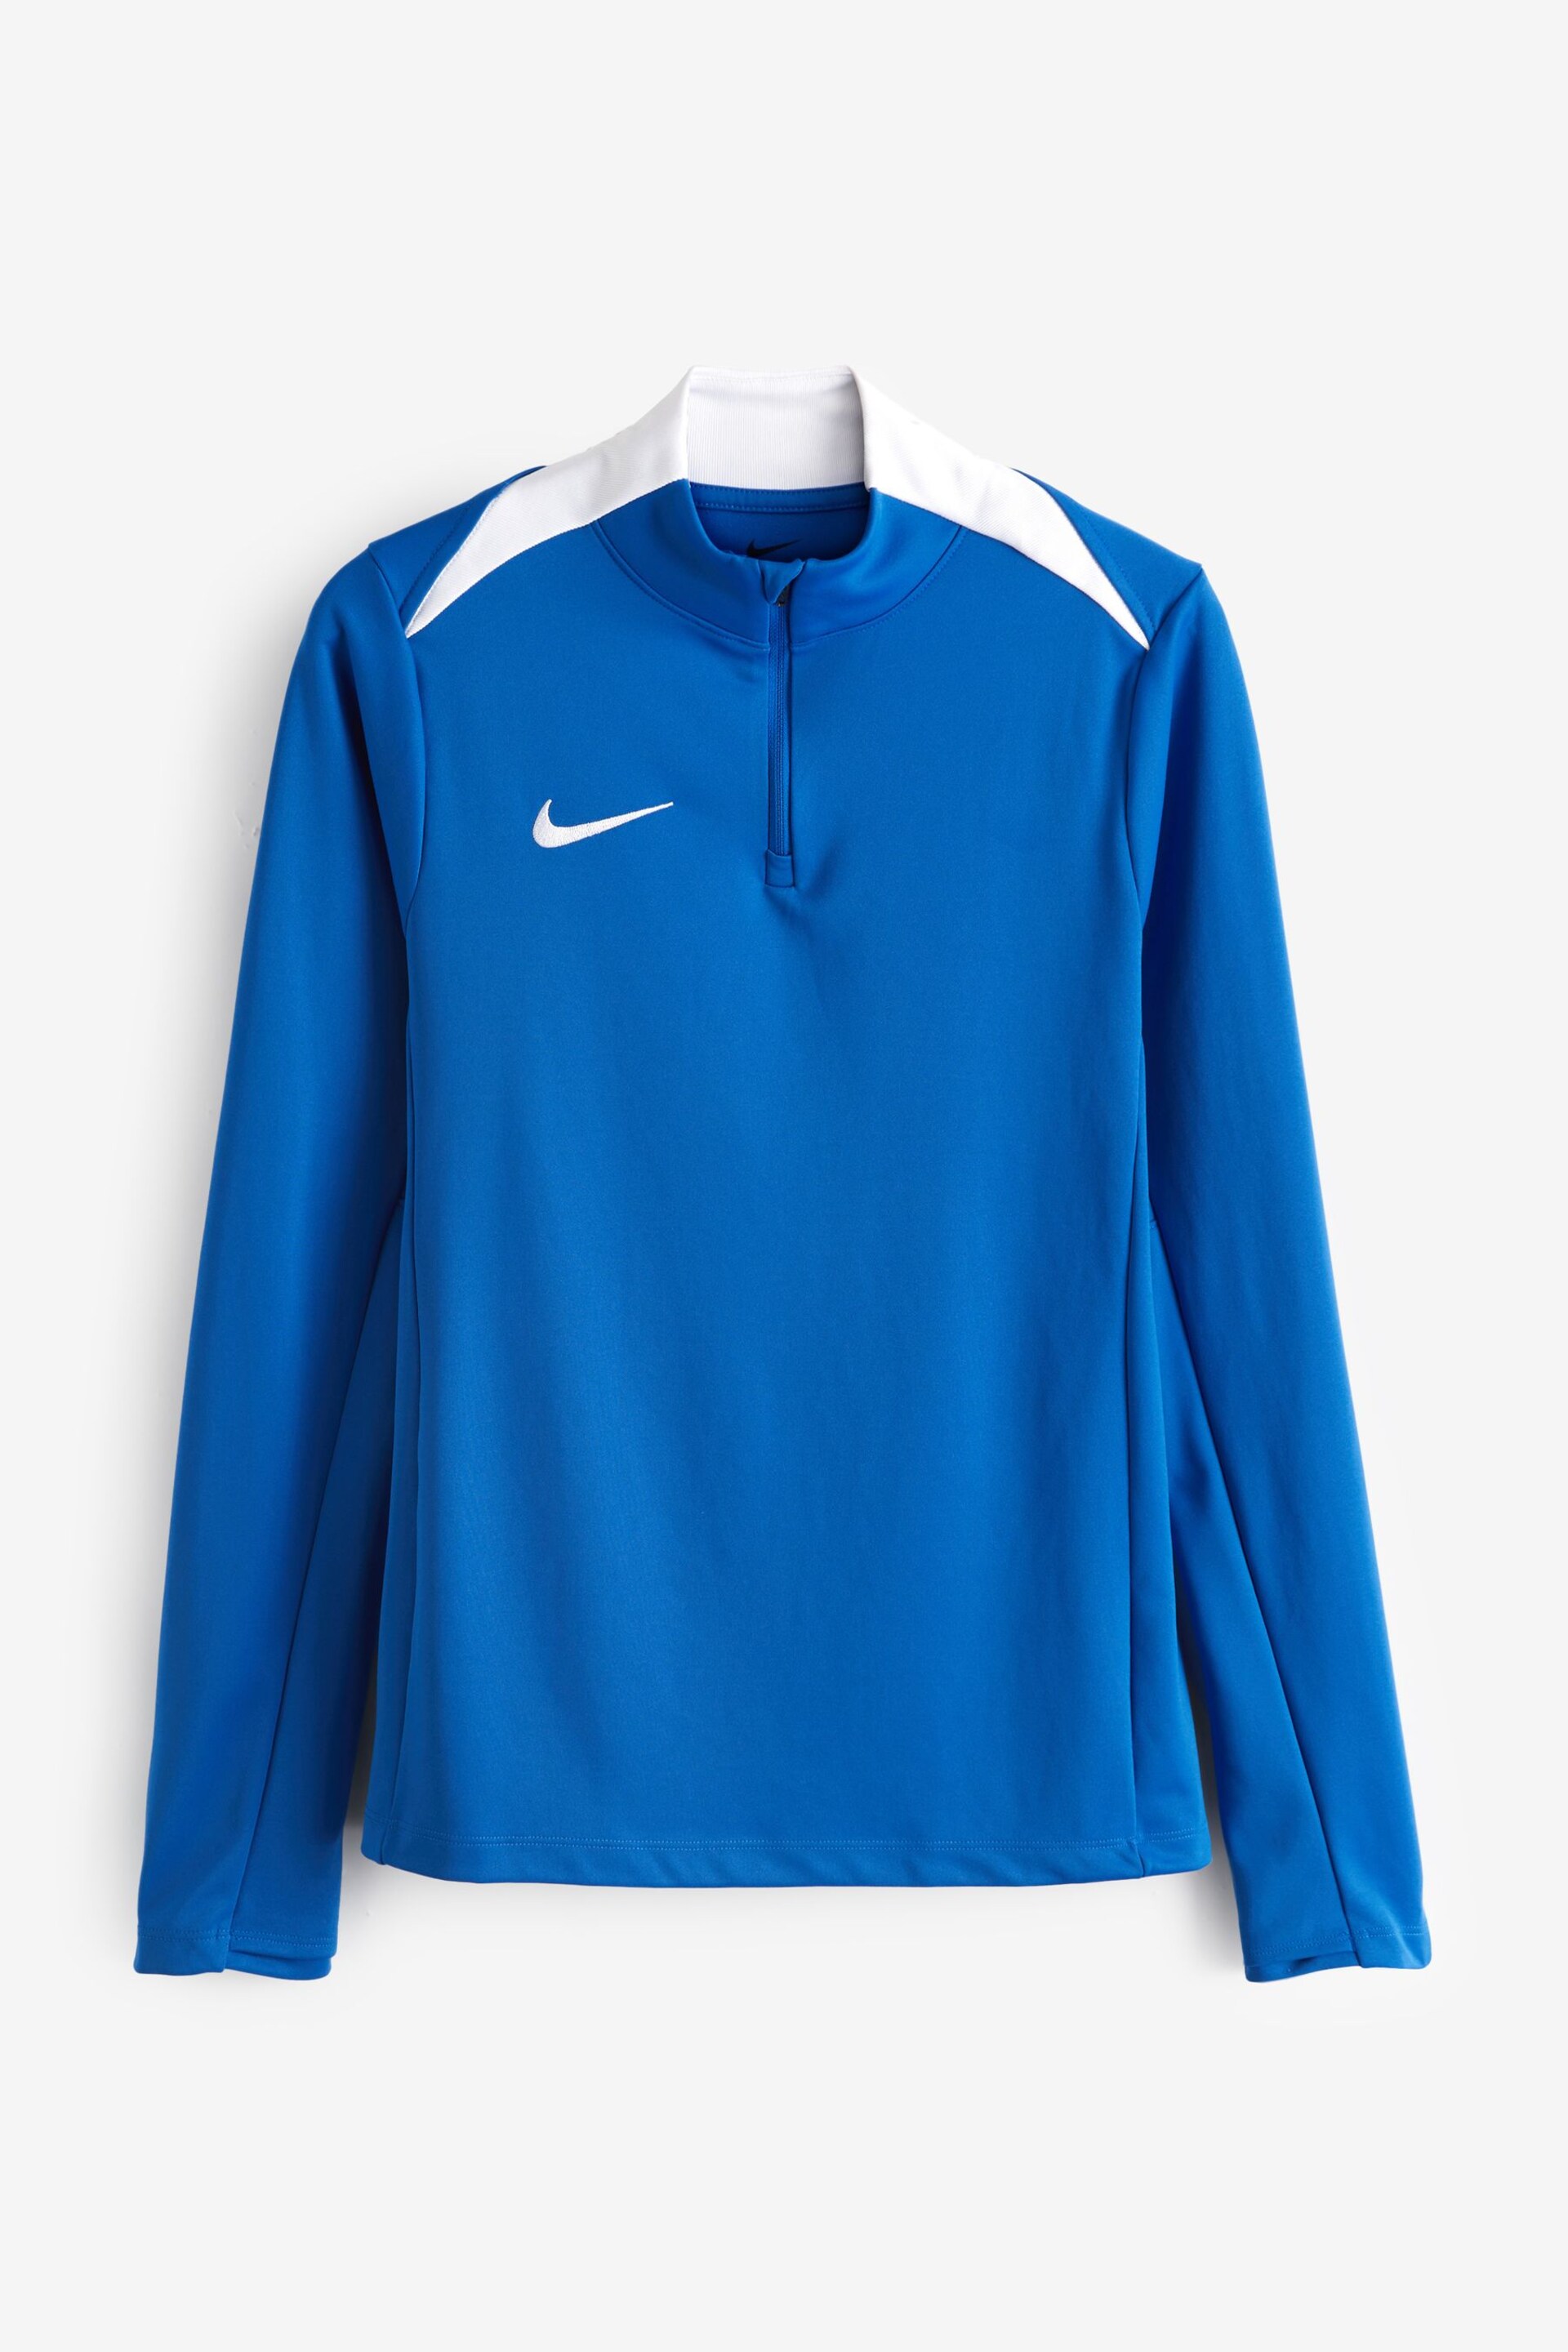 Nike Blue Dri-FIT Academy Drill Training Top - Image 1 of 1